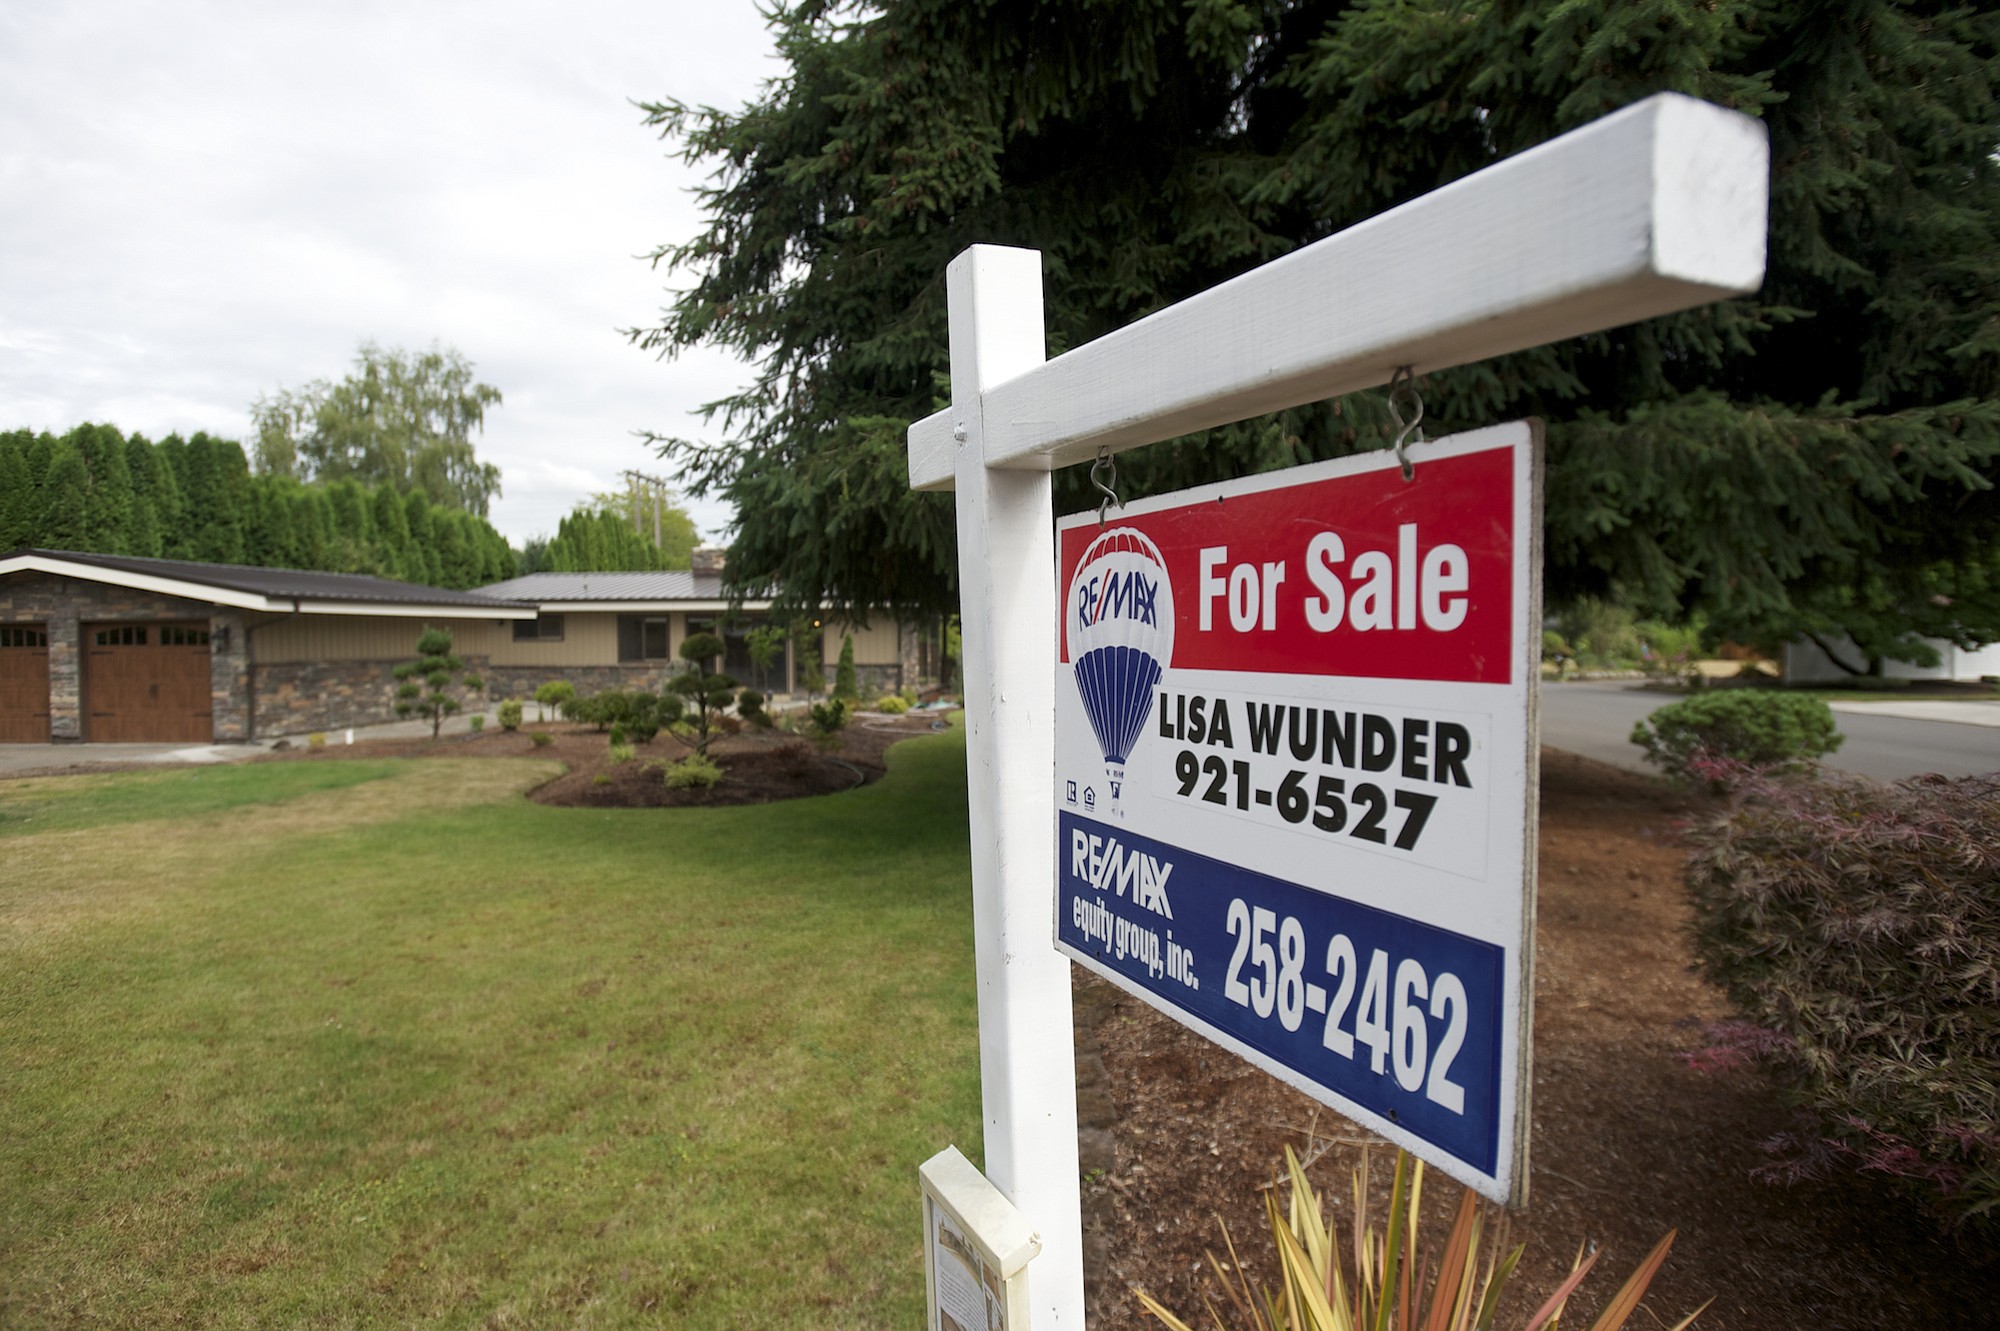 Clark County's housing market continued to gain momentum in April, with the inventory of homes offered for sale shrinking to the lowest level in years despite a 12 percent increase in new listings, the Portland-based RMLS real estate listing service reported.